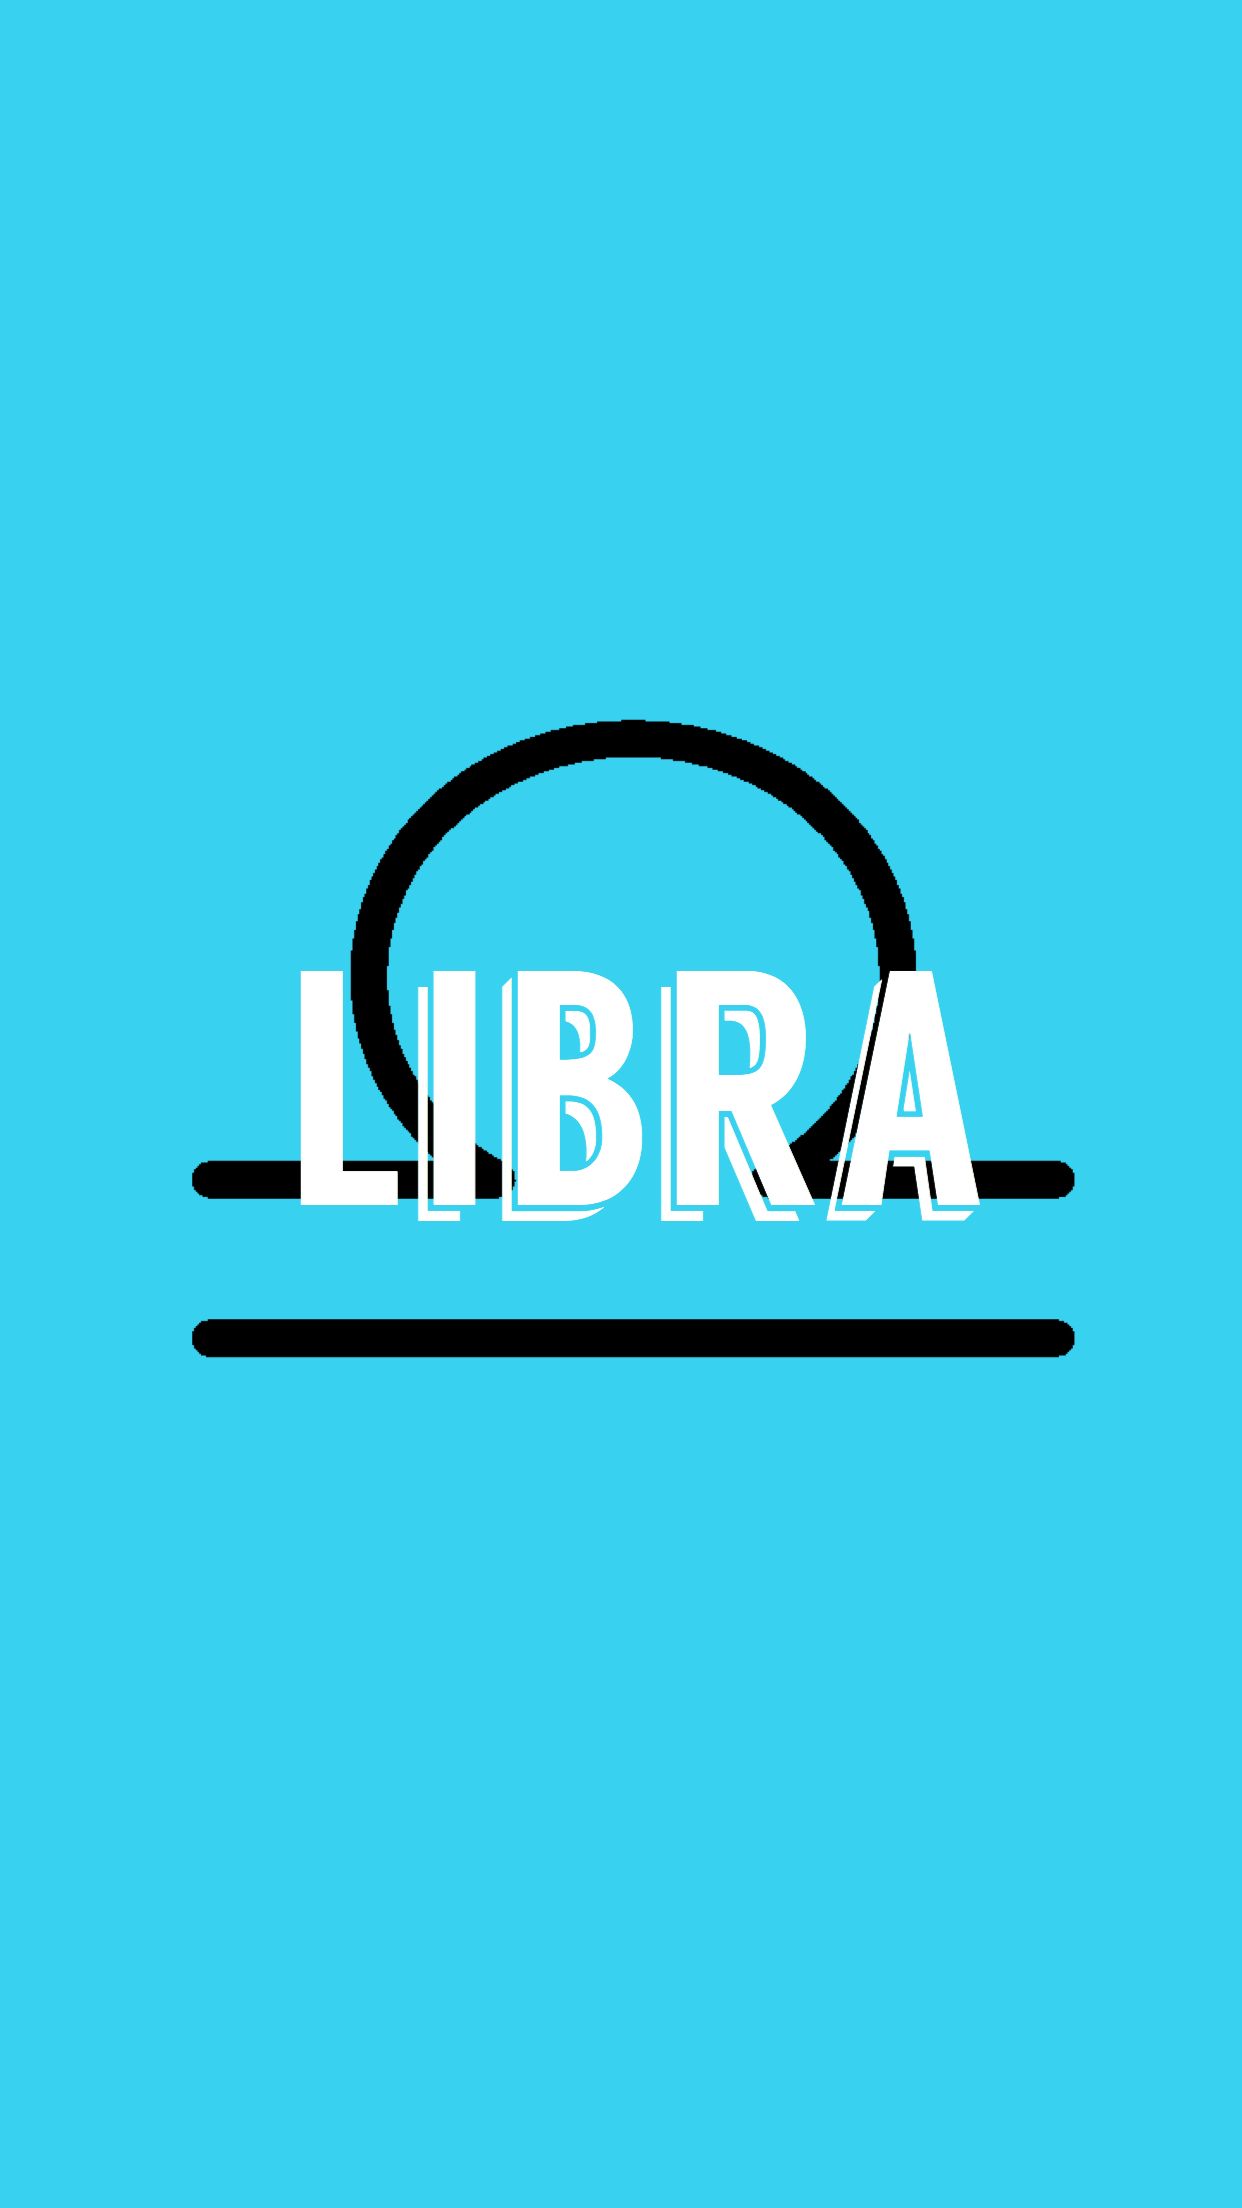 A blue background with the word libra on it - Libra